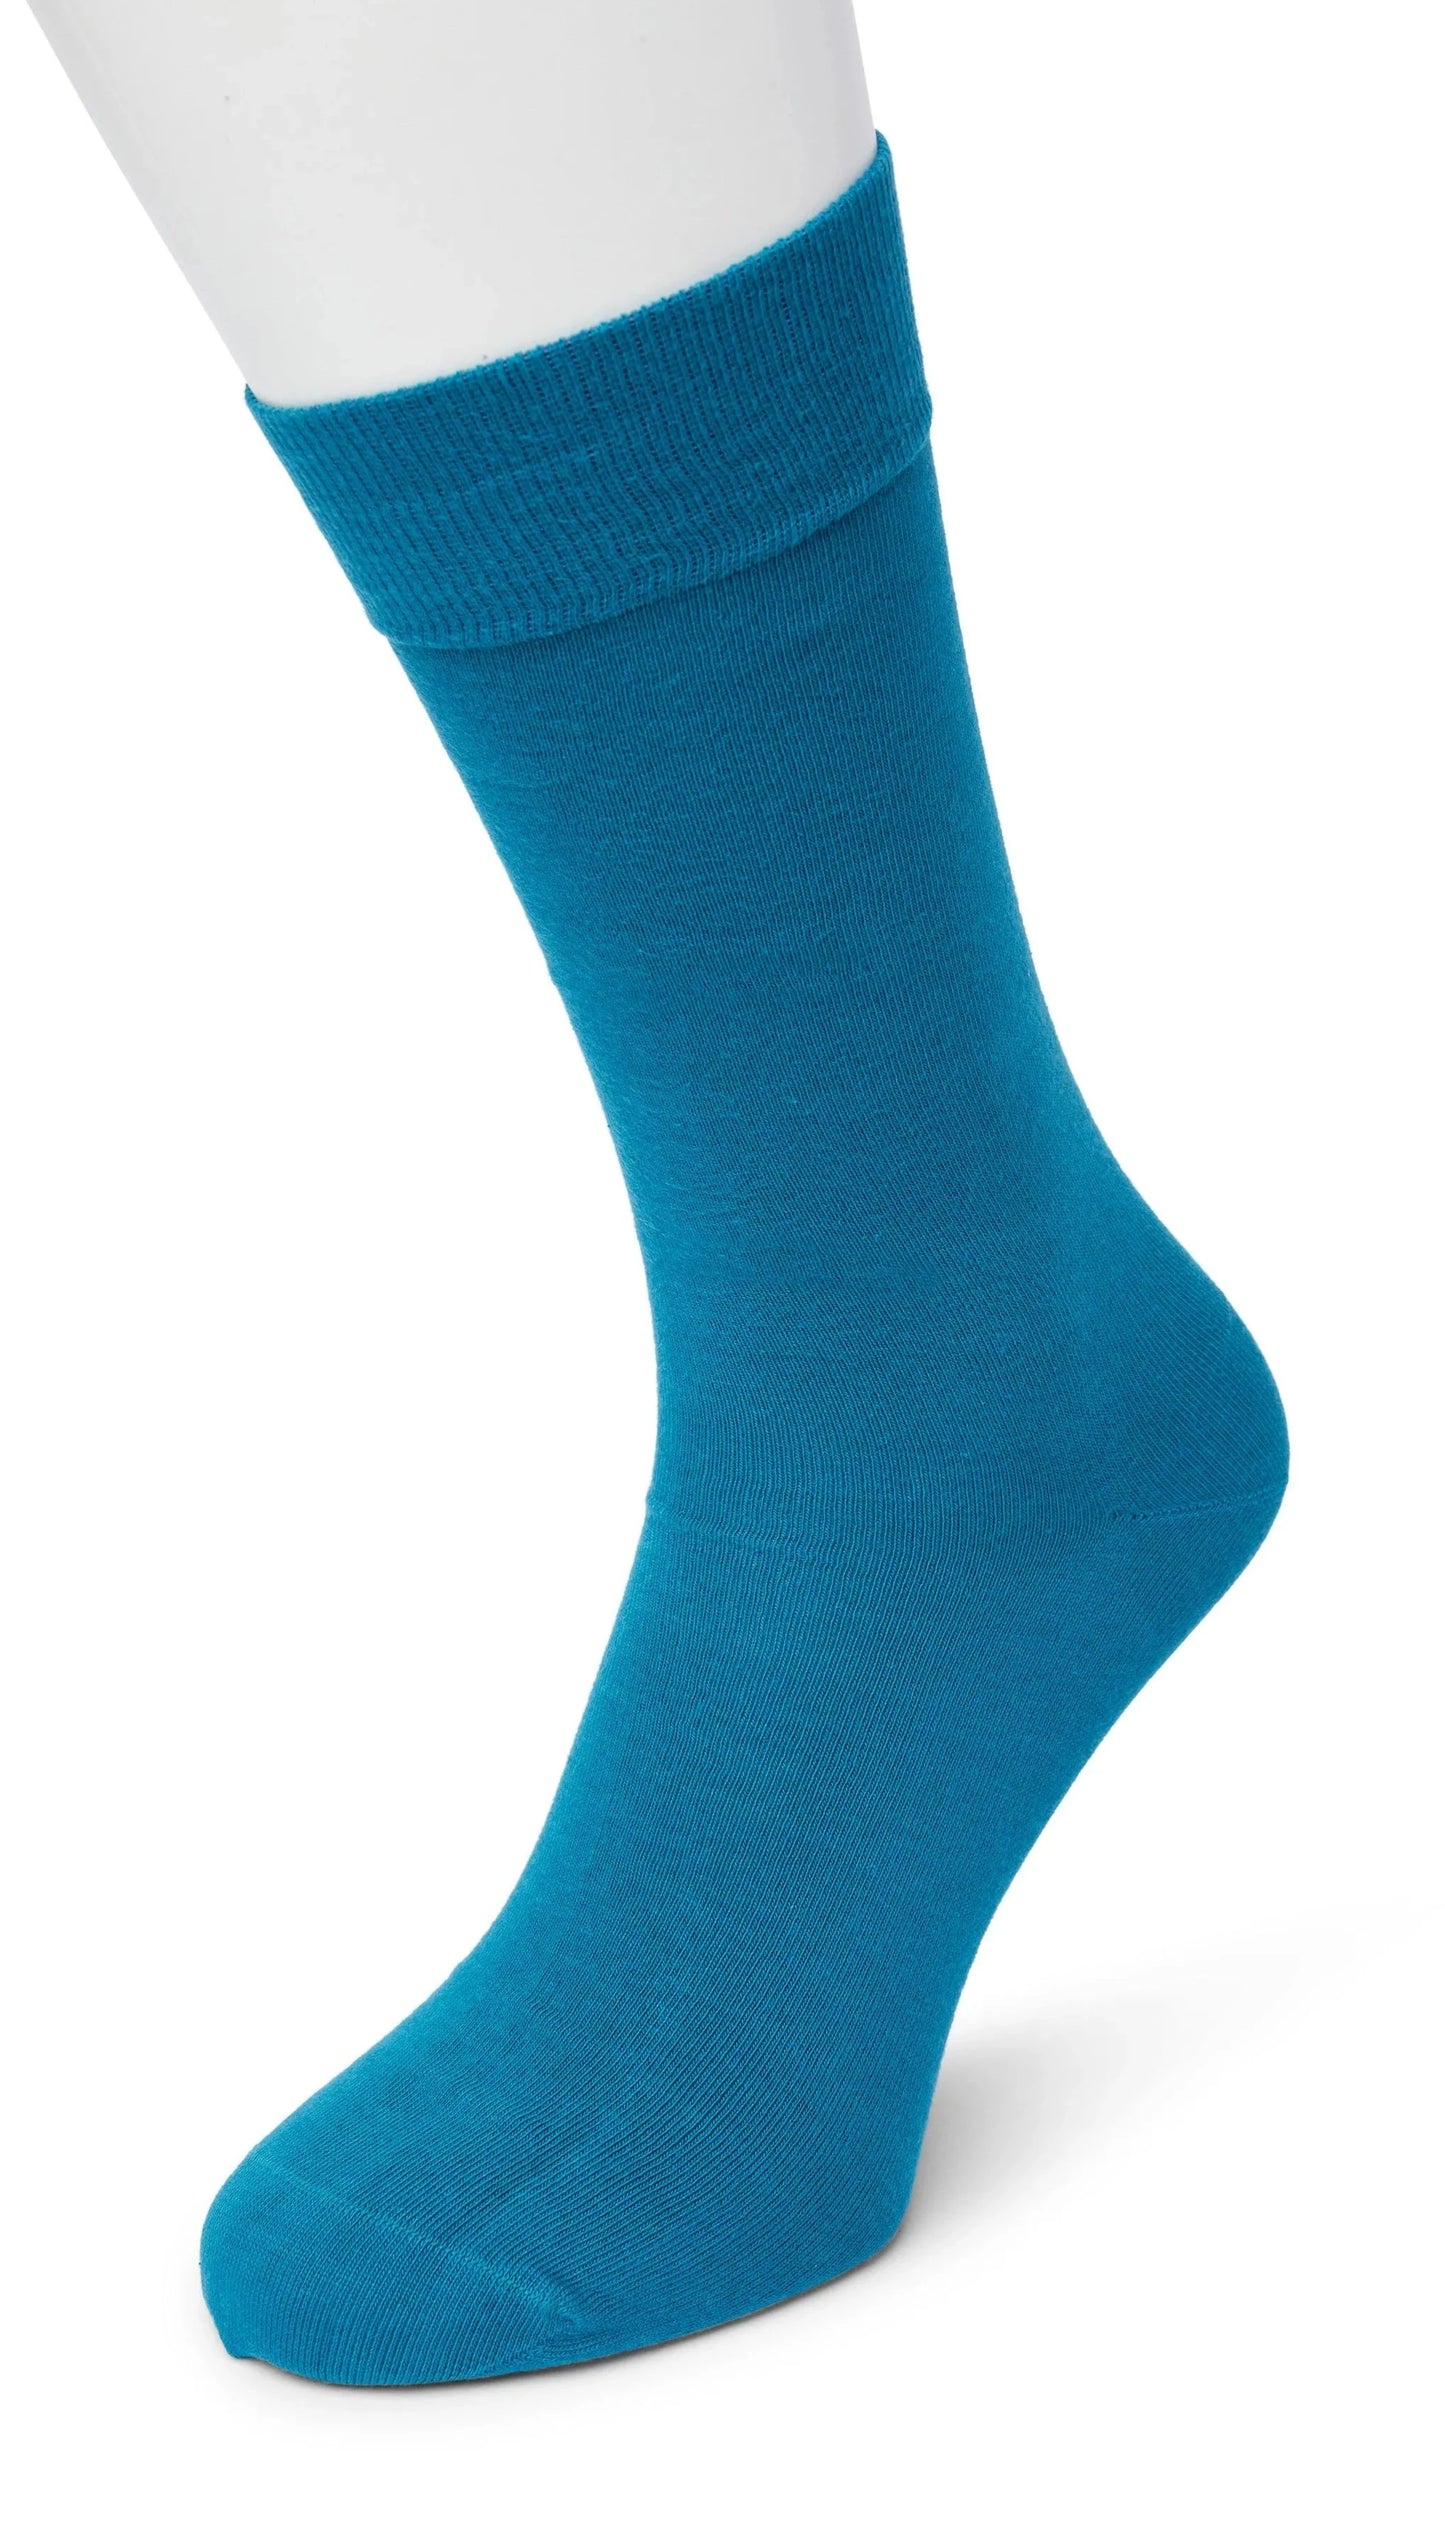 Bonnie Doon 83422 / BD632401 Cotton Sock - teal (deep lake) ankle socks available in men and women sizes